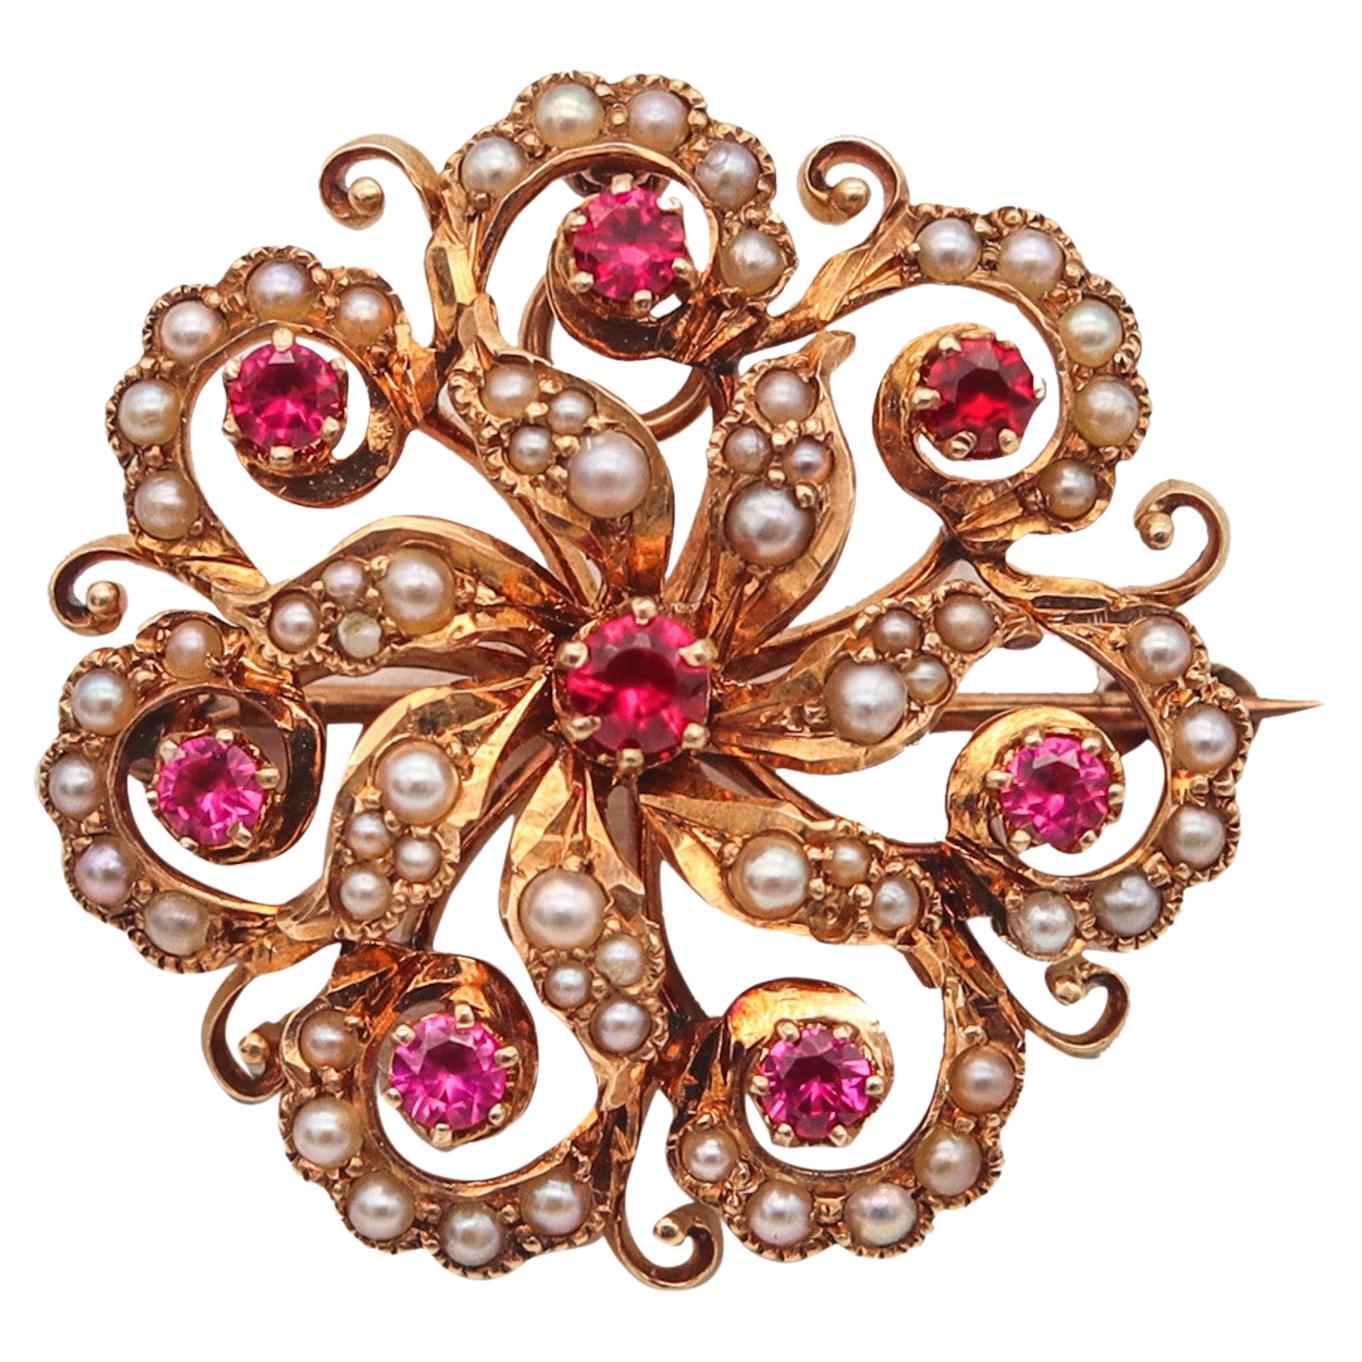 Victorian 1890 Convertible Pendant & Brooch Solid 14Kt Gold With Pearls & Rubies For Sale